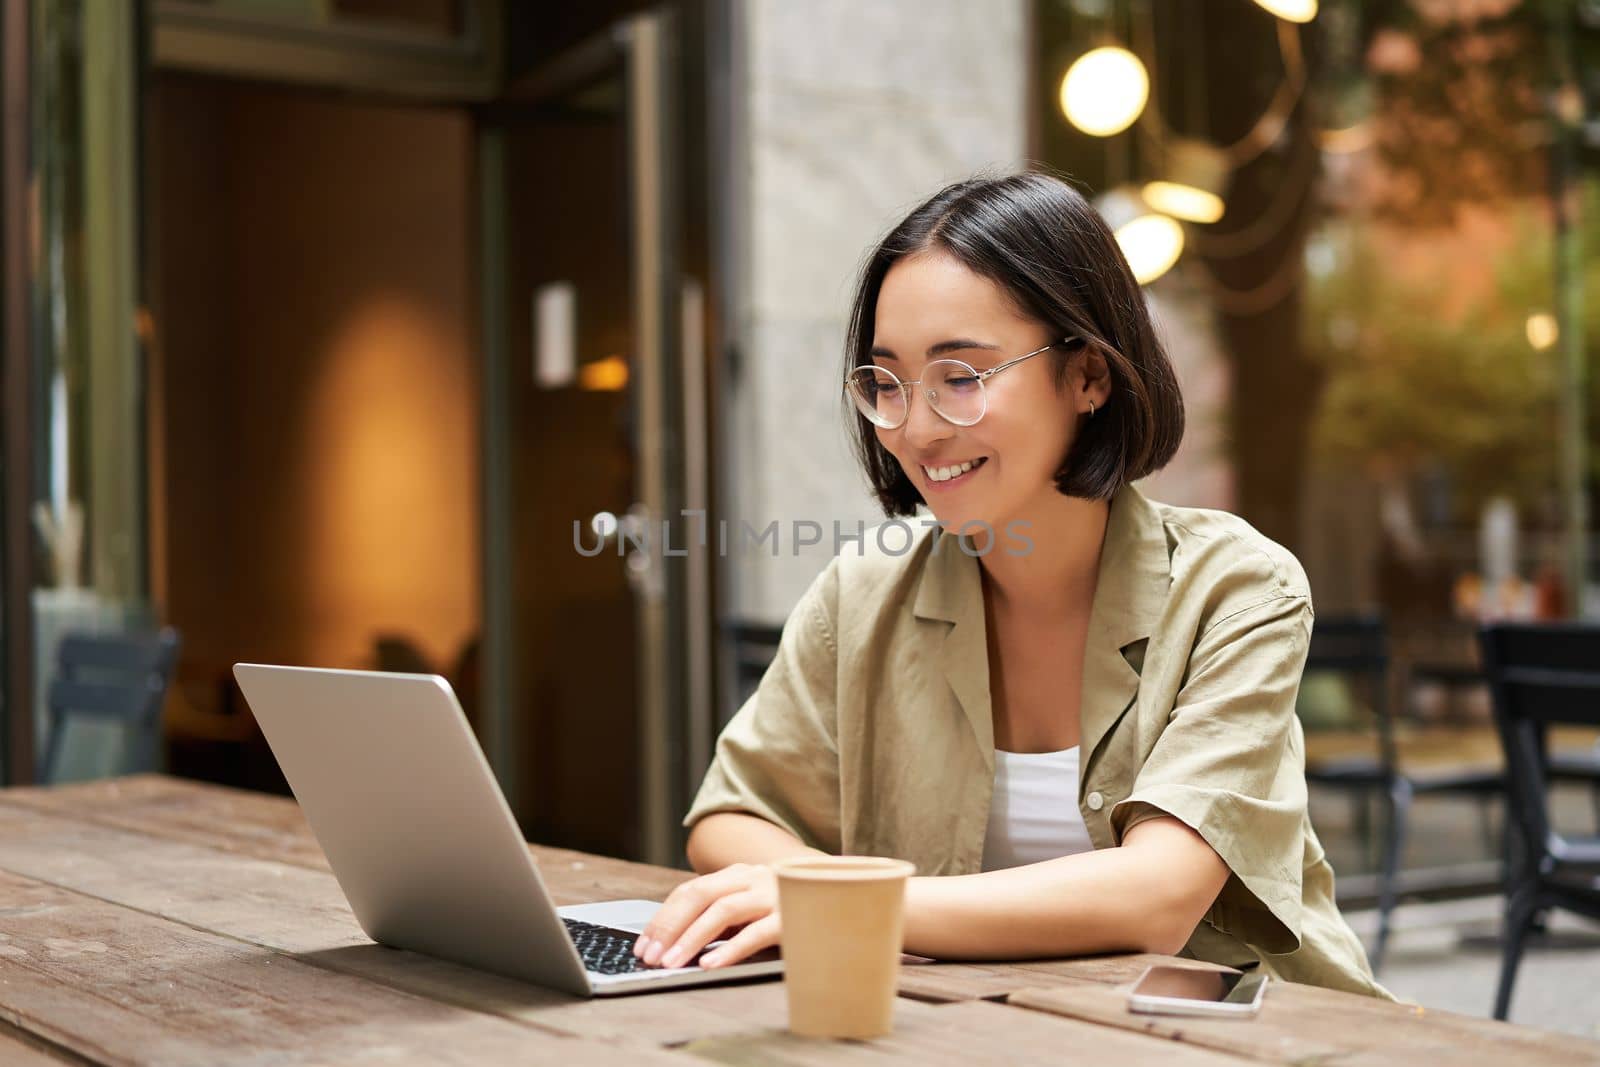 Young woman working in a cafe, using laptop and drinking coffee. Asian girl student with computer studying remotely, sitting on bench near shop.